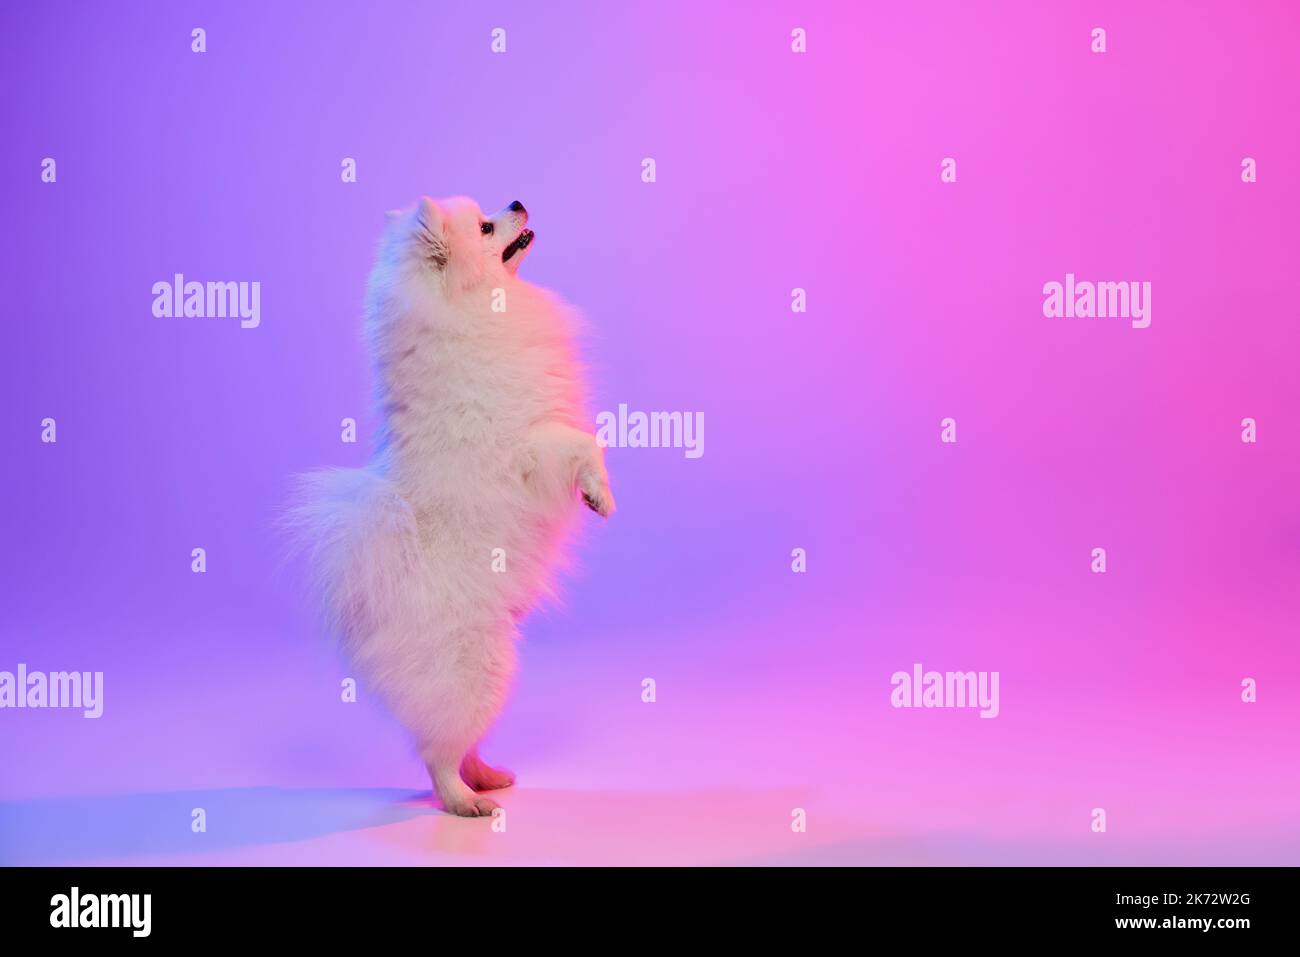 Cute small white pomeranian Spitz, doggy stands on its hind legs isolated over gradient pink-purple background in neon light. Concept of movement Stock Photo